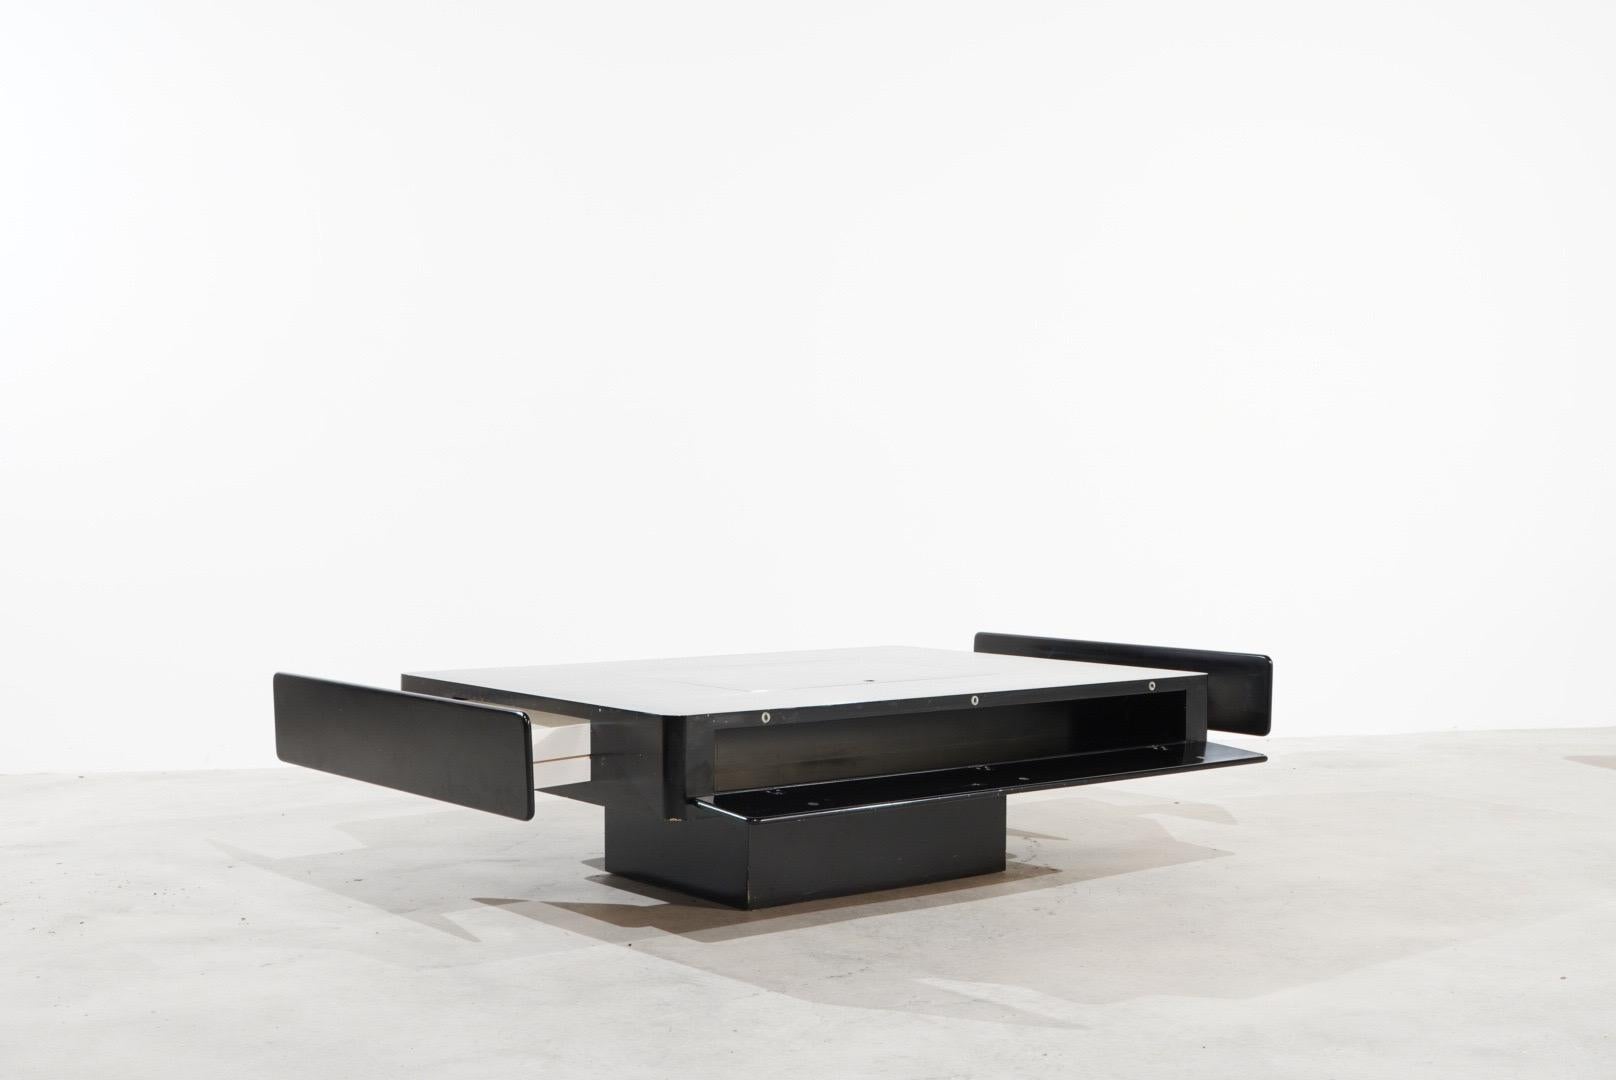 Beautiful Coffee Table by the famous italian Designer Vico Magistretti called ,,Caori“ , manufactured by Gavina in the 1960s. The coffee table is made of lacquered wood. The top is in satin-finished stainless steel and has a central opening with a